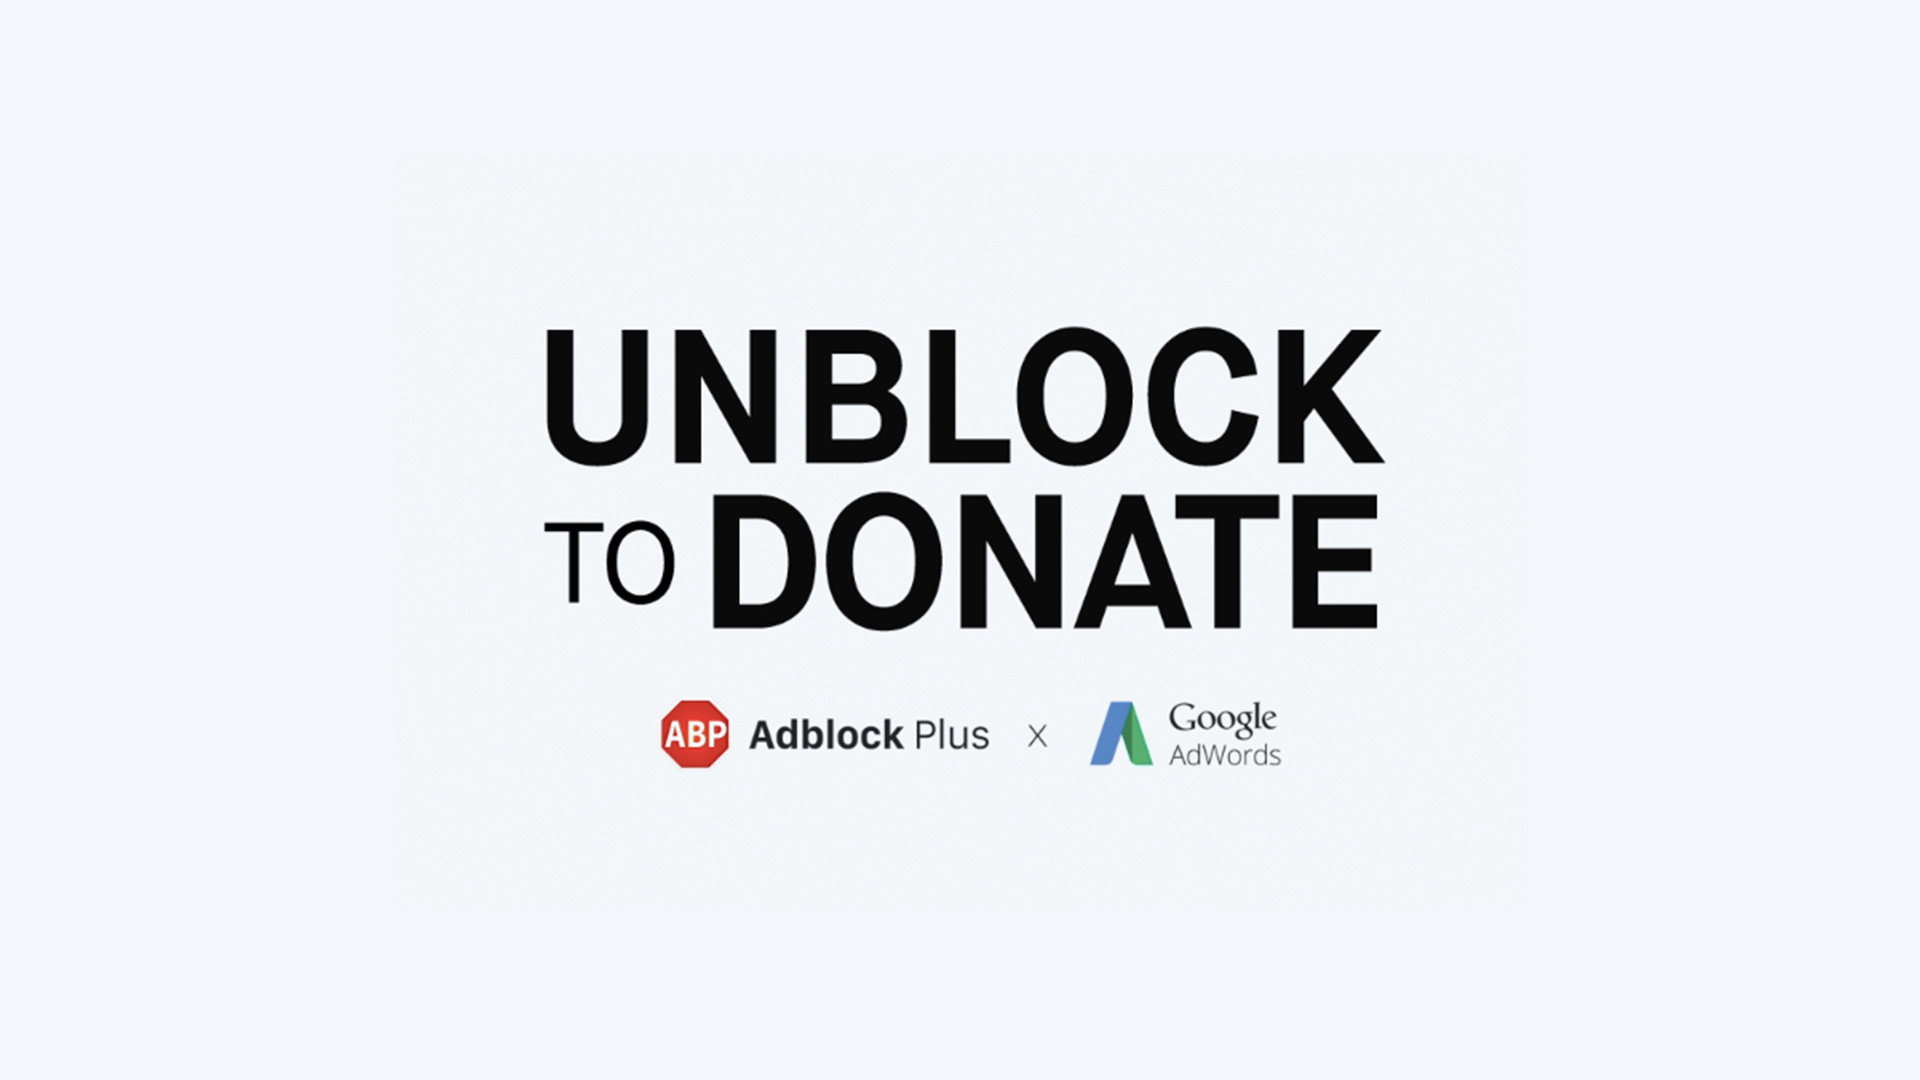 Unblock to Donate